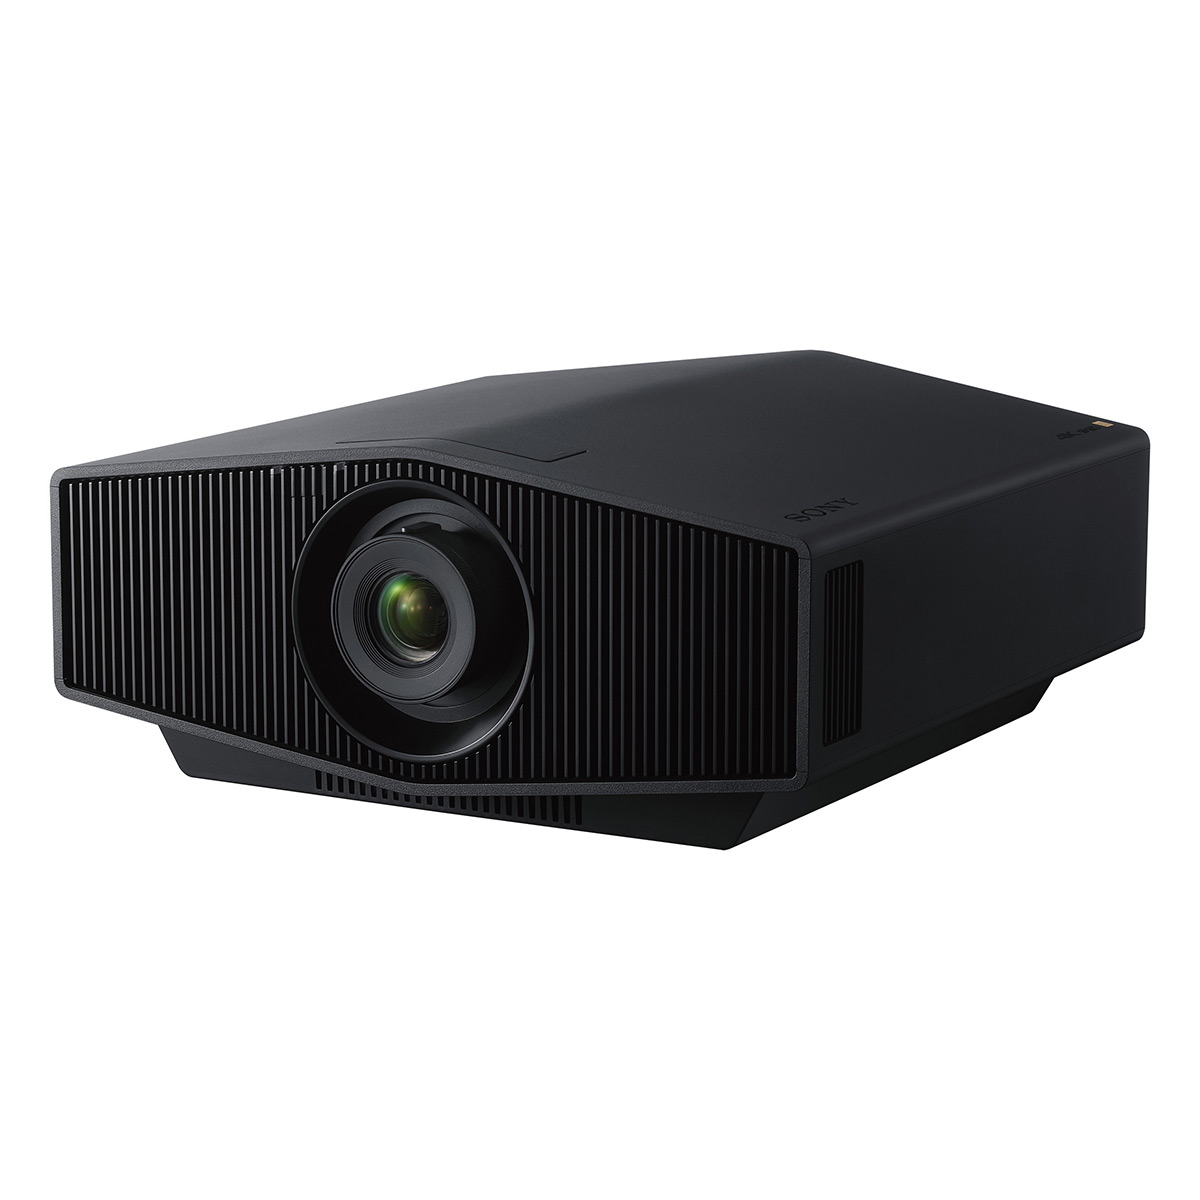 Sony VPL-XW5000ES 4K HDR Laser Home Theater Projector with Wide Dynamic Range Optics, 95% DCI-P3 Wide Color Gamut, & 2,000 Lumen Brightness (Black) - image 1 of 8